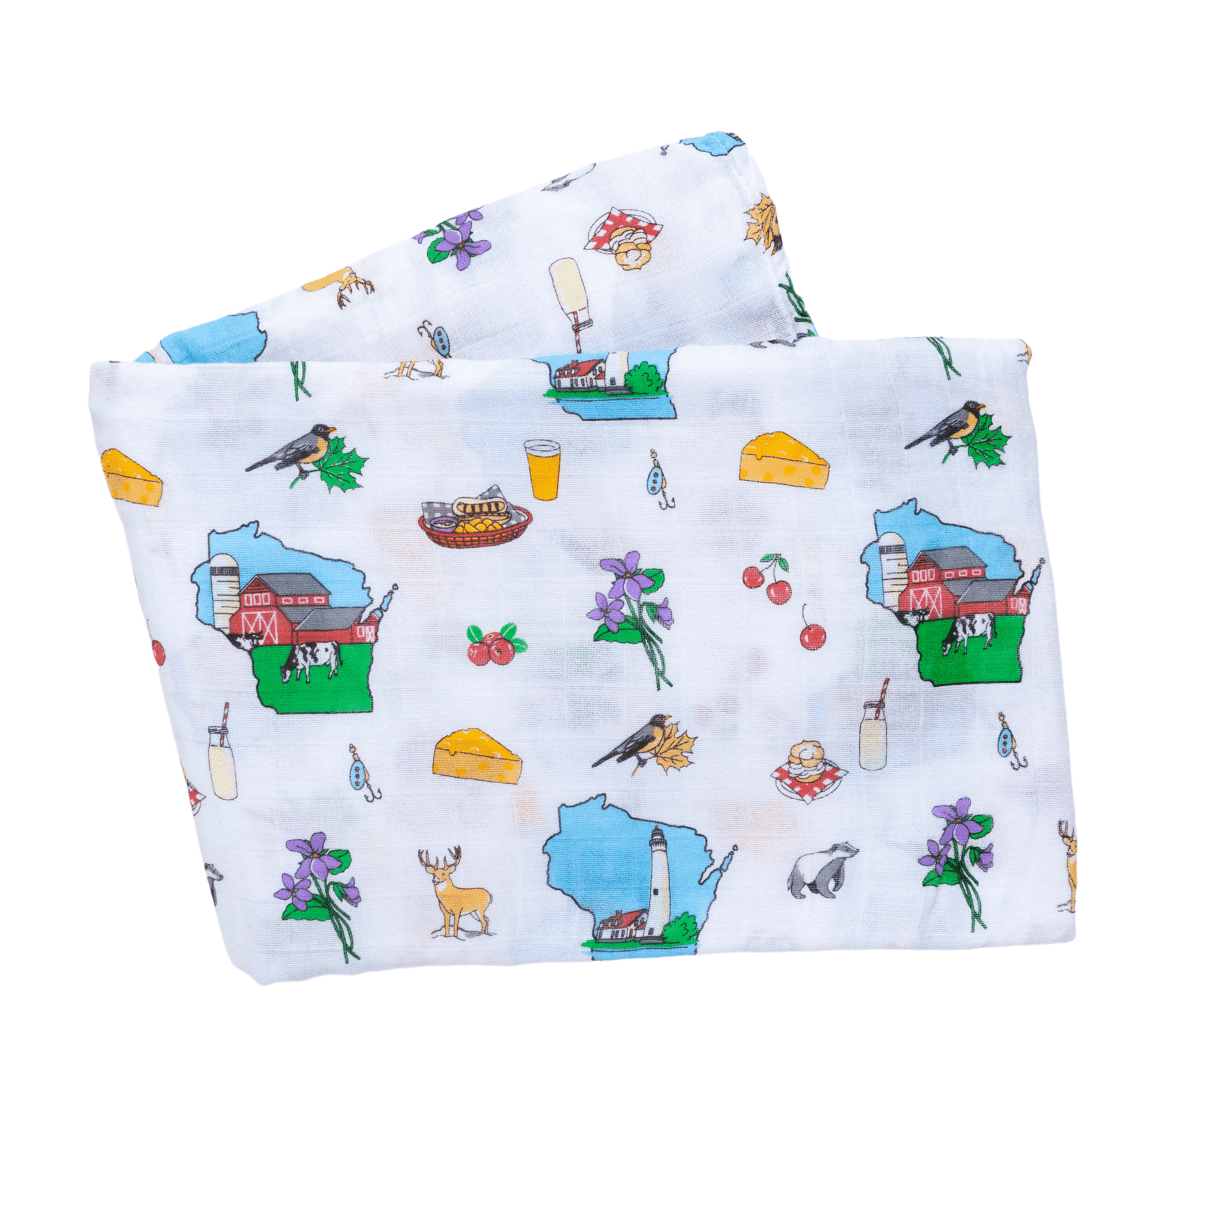 White muslin swaddle blanket with a colorful map of Wisconsin, featuring landmarks, animals, and state symbols.